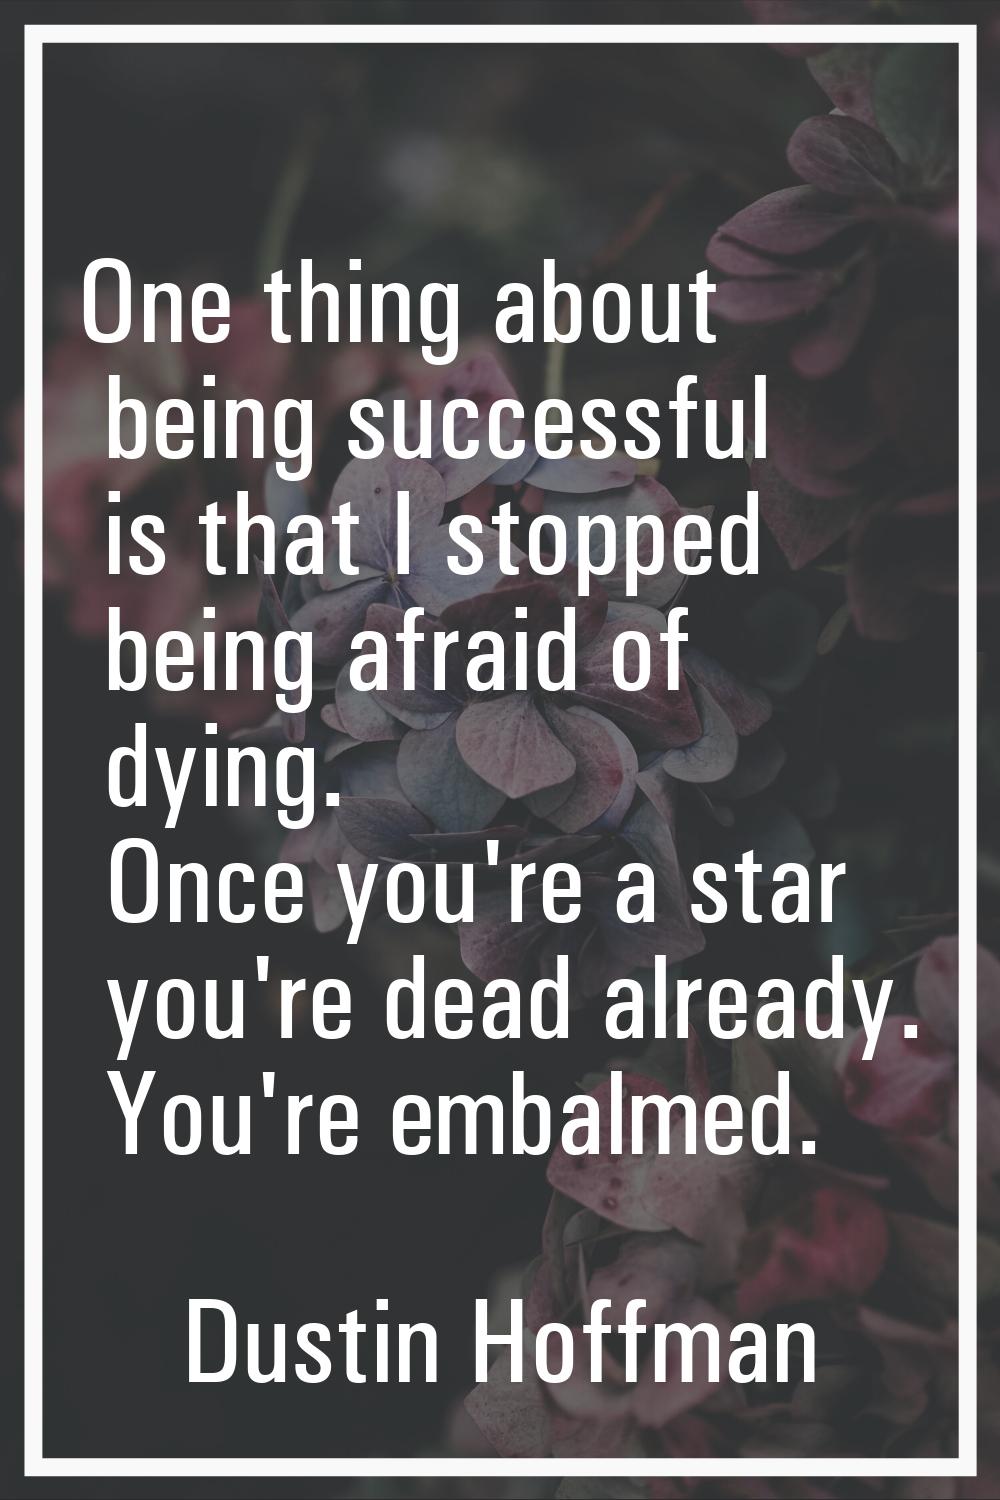 One thing about being successful is that I stopped being afraid of dying. Once you're a star you're